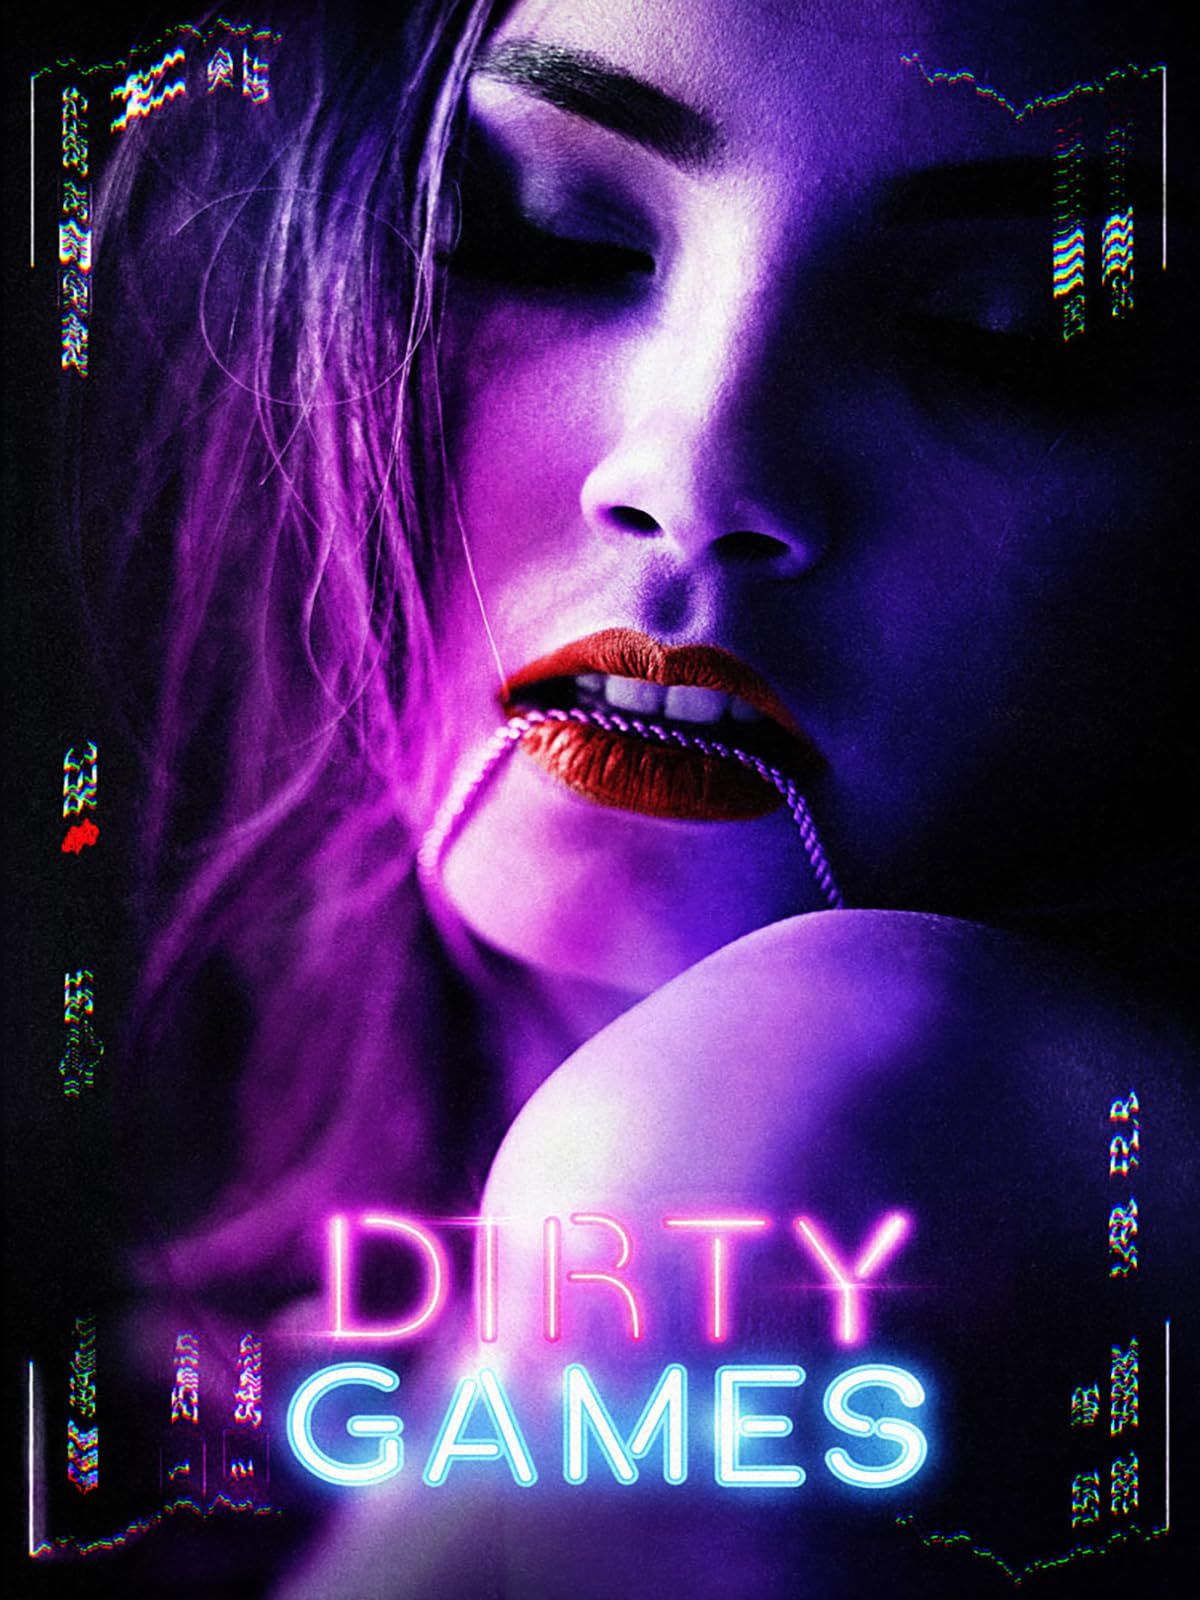 [18+] Dirty Games (2022) UNARTED English HDRip download full movie